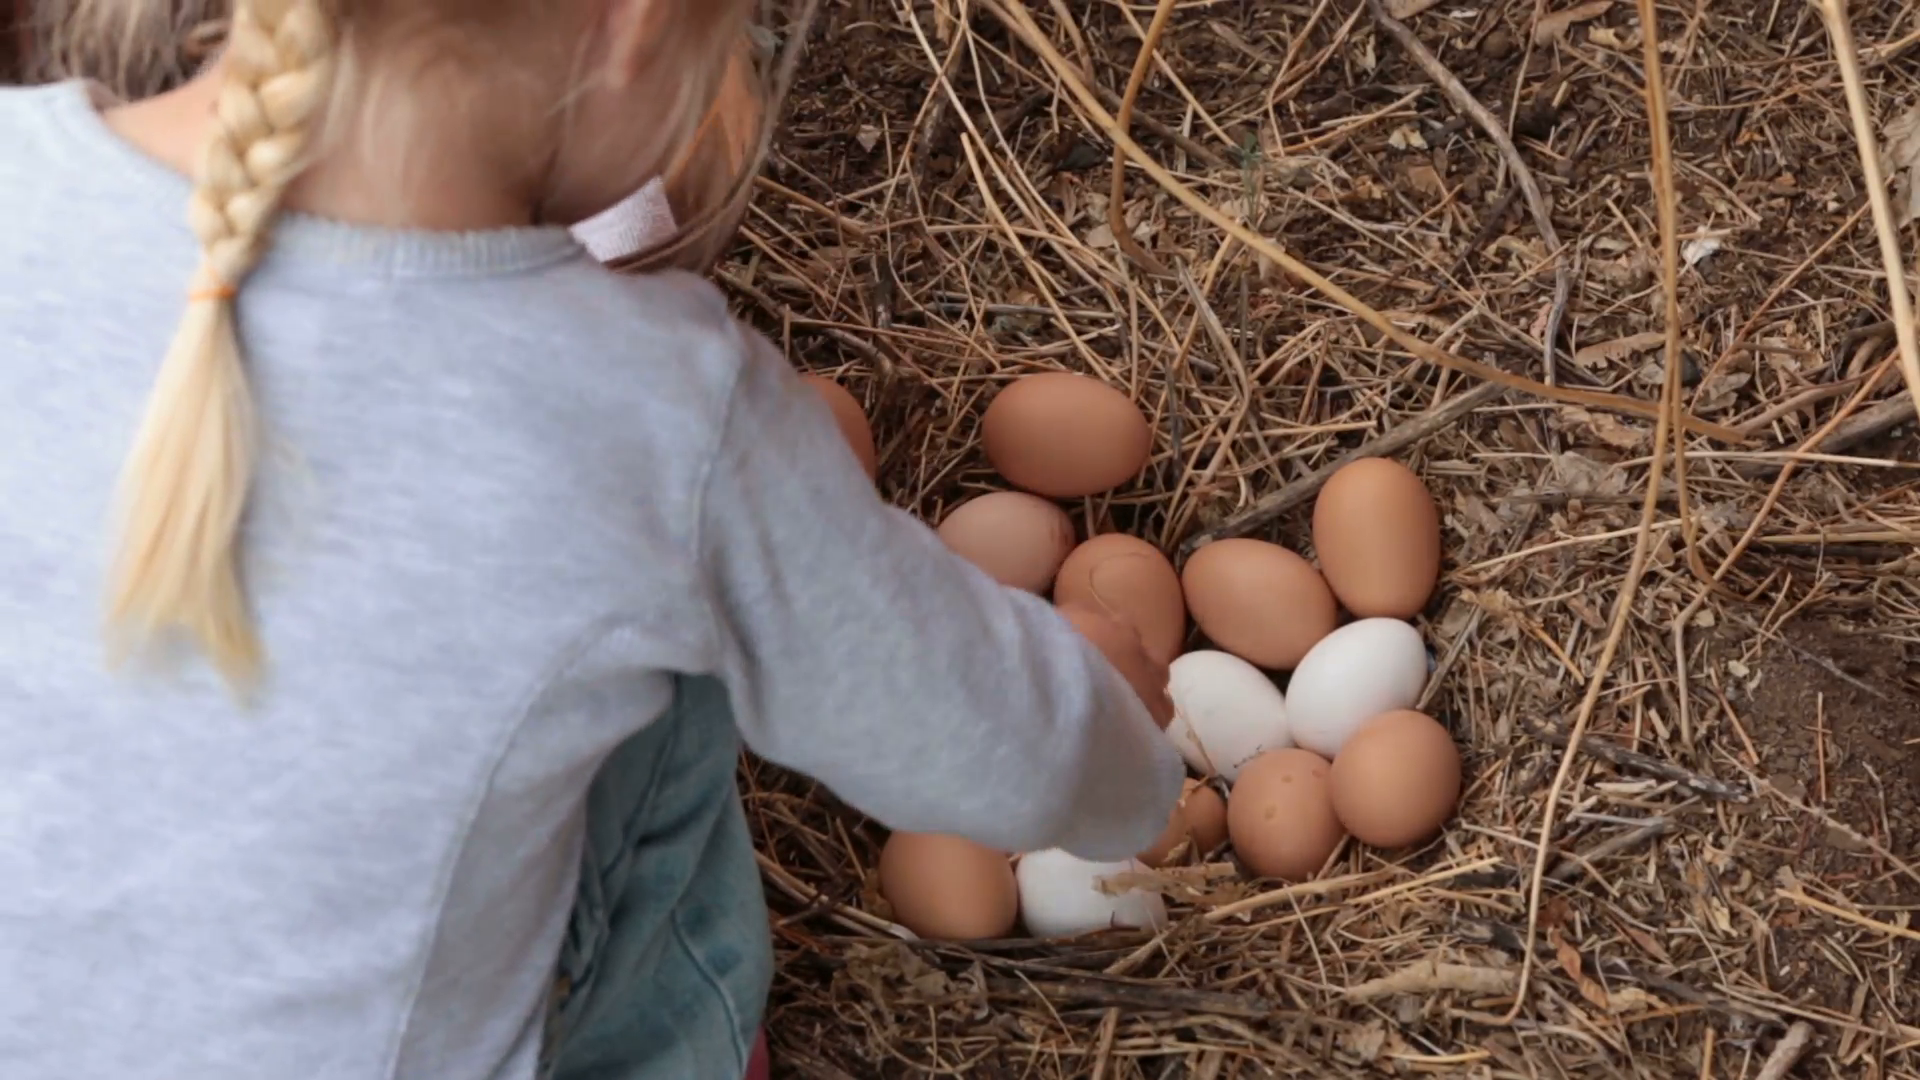 Young girl picking chicken eggs from outdoor nest. Sorting and ...